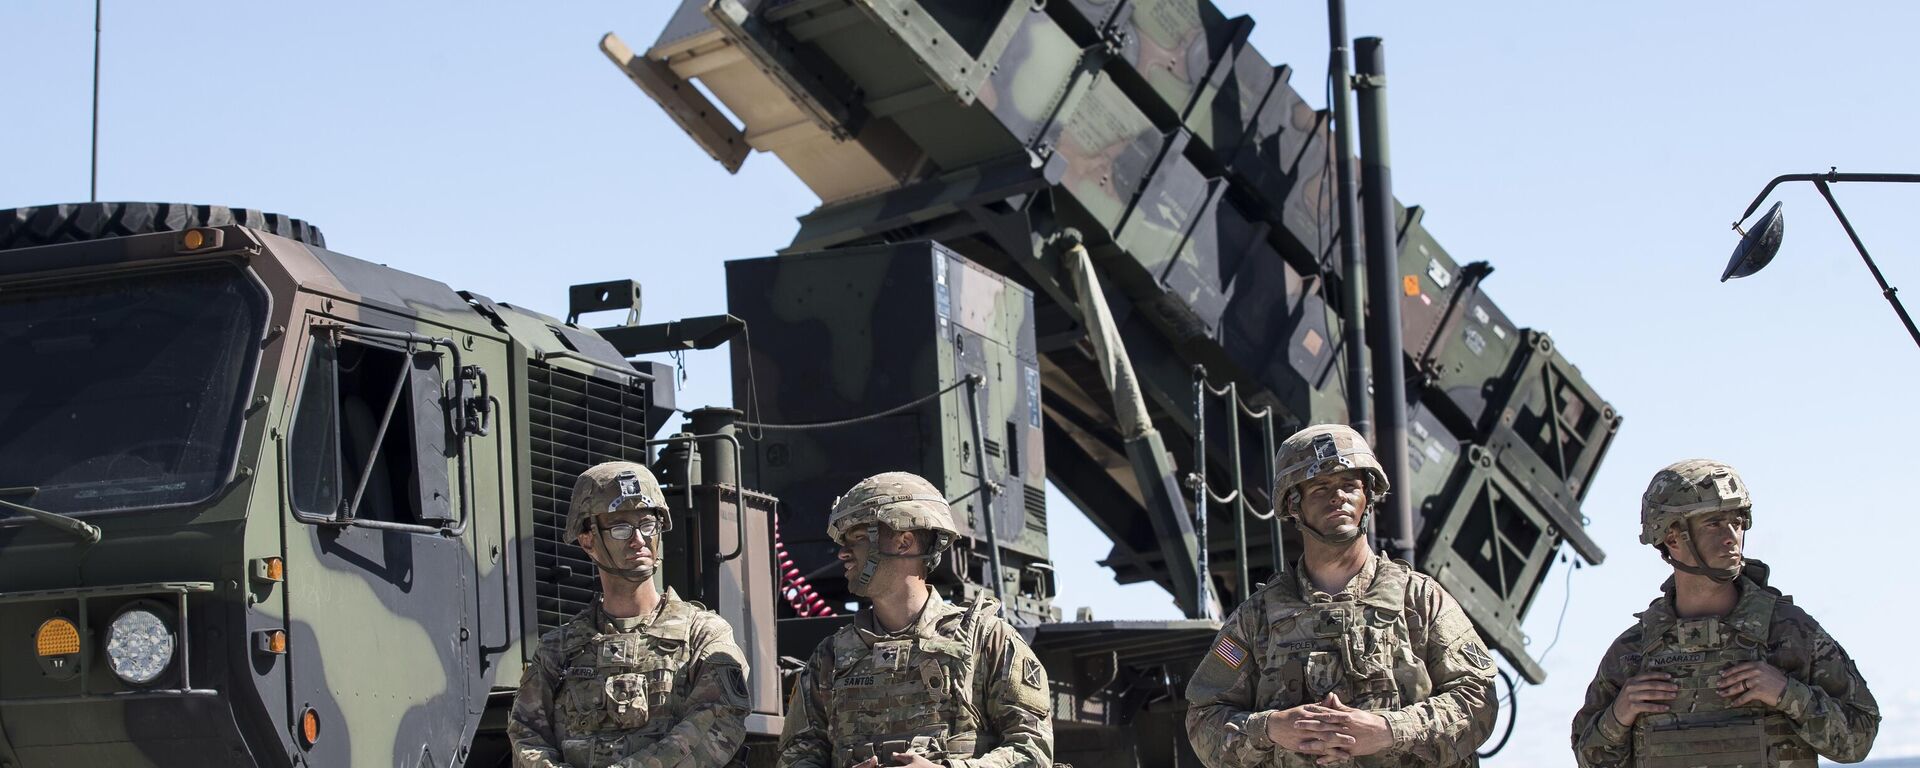 Members of US 10th Army Air and Missile Defense Command stands next to a Patriot surface-to-air missile battery during the NATO multinational ground based air defence units exercise Tobruq Legacy 2017 at the Siauliai airbase some 230 km. (144 miles) east of the capital Vilnius, Lithuania, on July 20, 2017 - Sputnik International, 1920, 21.06.2023